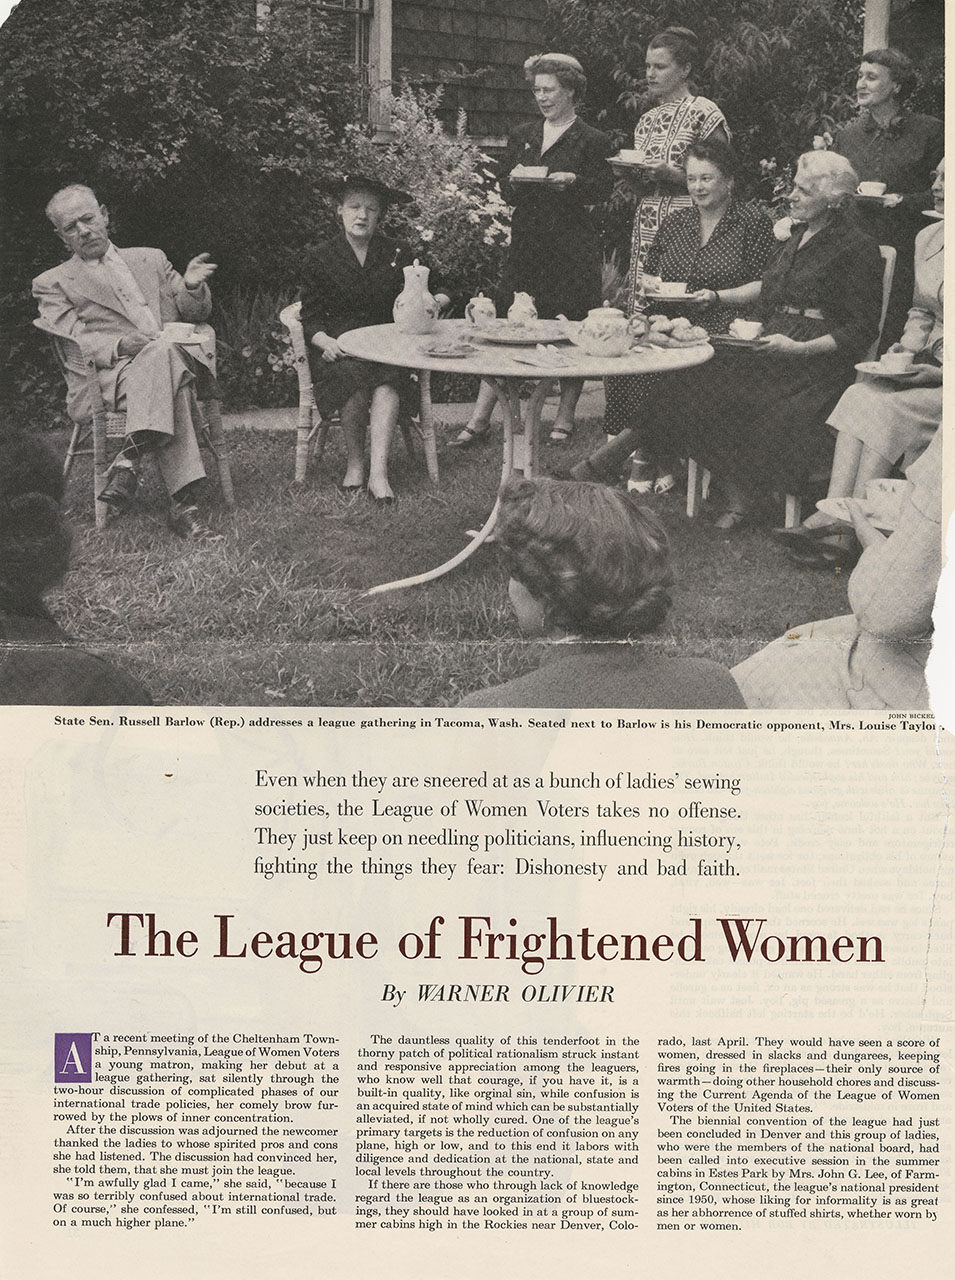 The League of Frightened Women magazine article